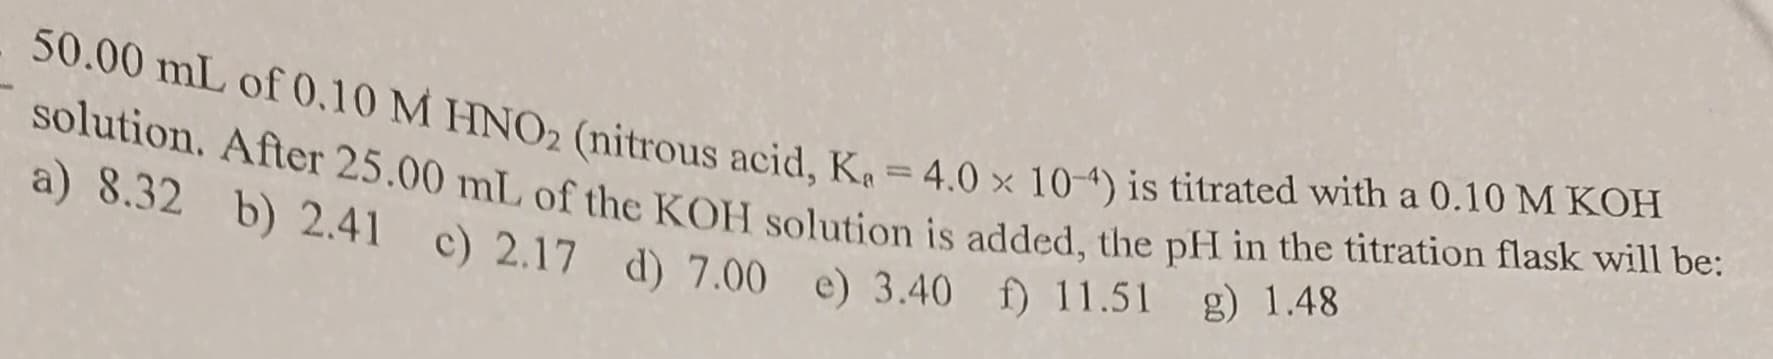 50.00 mL of 0.10 M HNO2 (nitrous acid, Ka = 4.0 x 10-4) is titrated with a 0.10 M KOH
solution. After 25.00 mL of the KOH solution is added, the pH in the titration flask will be:
a) 8.32 b) 2.41 c) 2.17 d) 7.00 e) 3.40 f) 11.51
g) 1.48